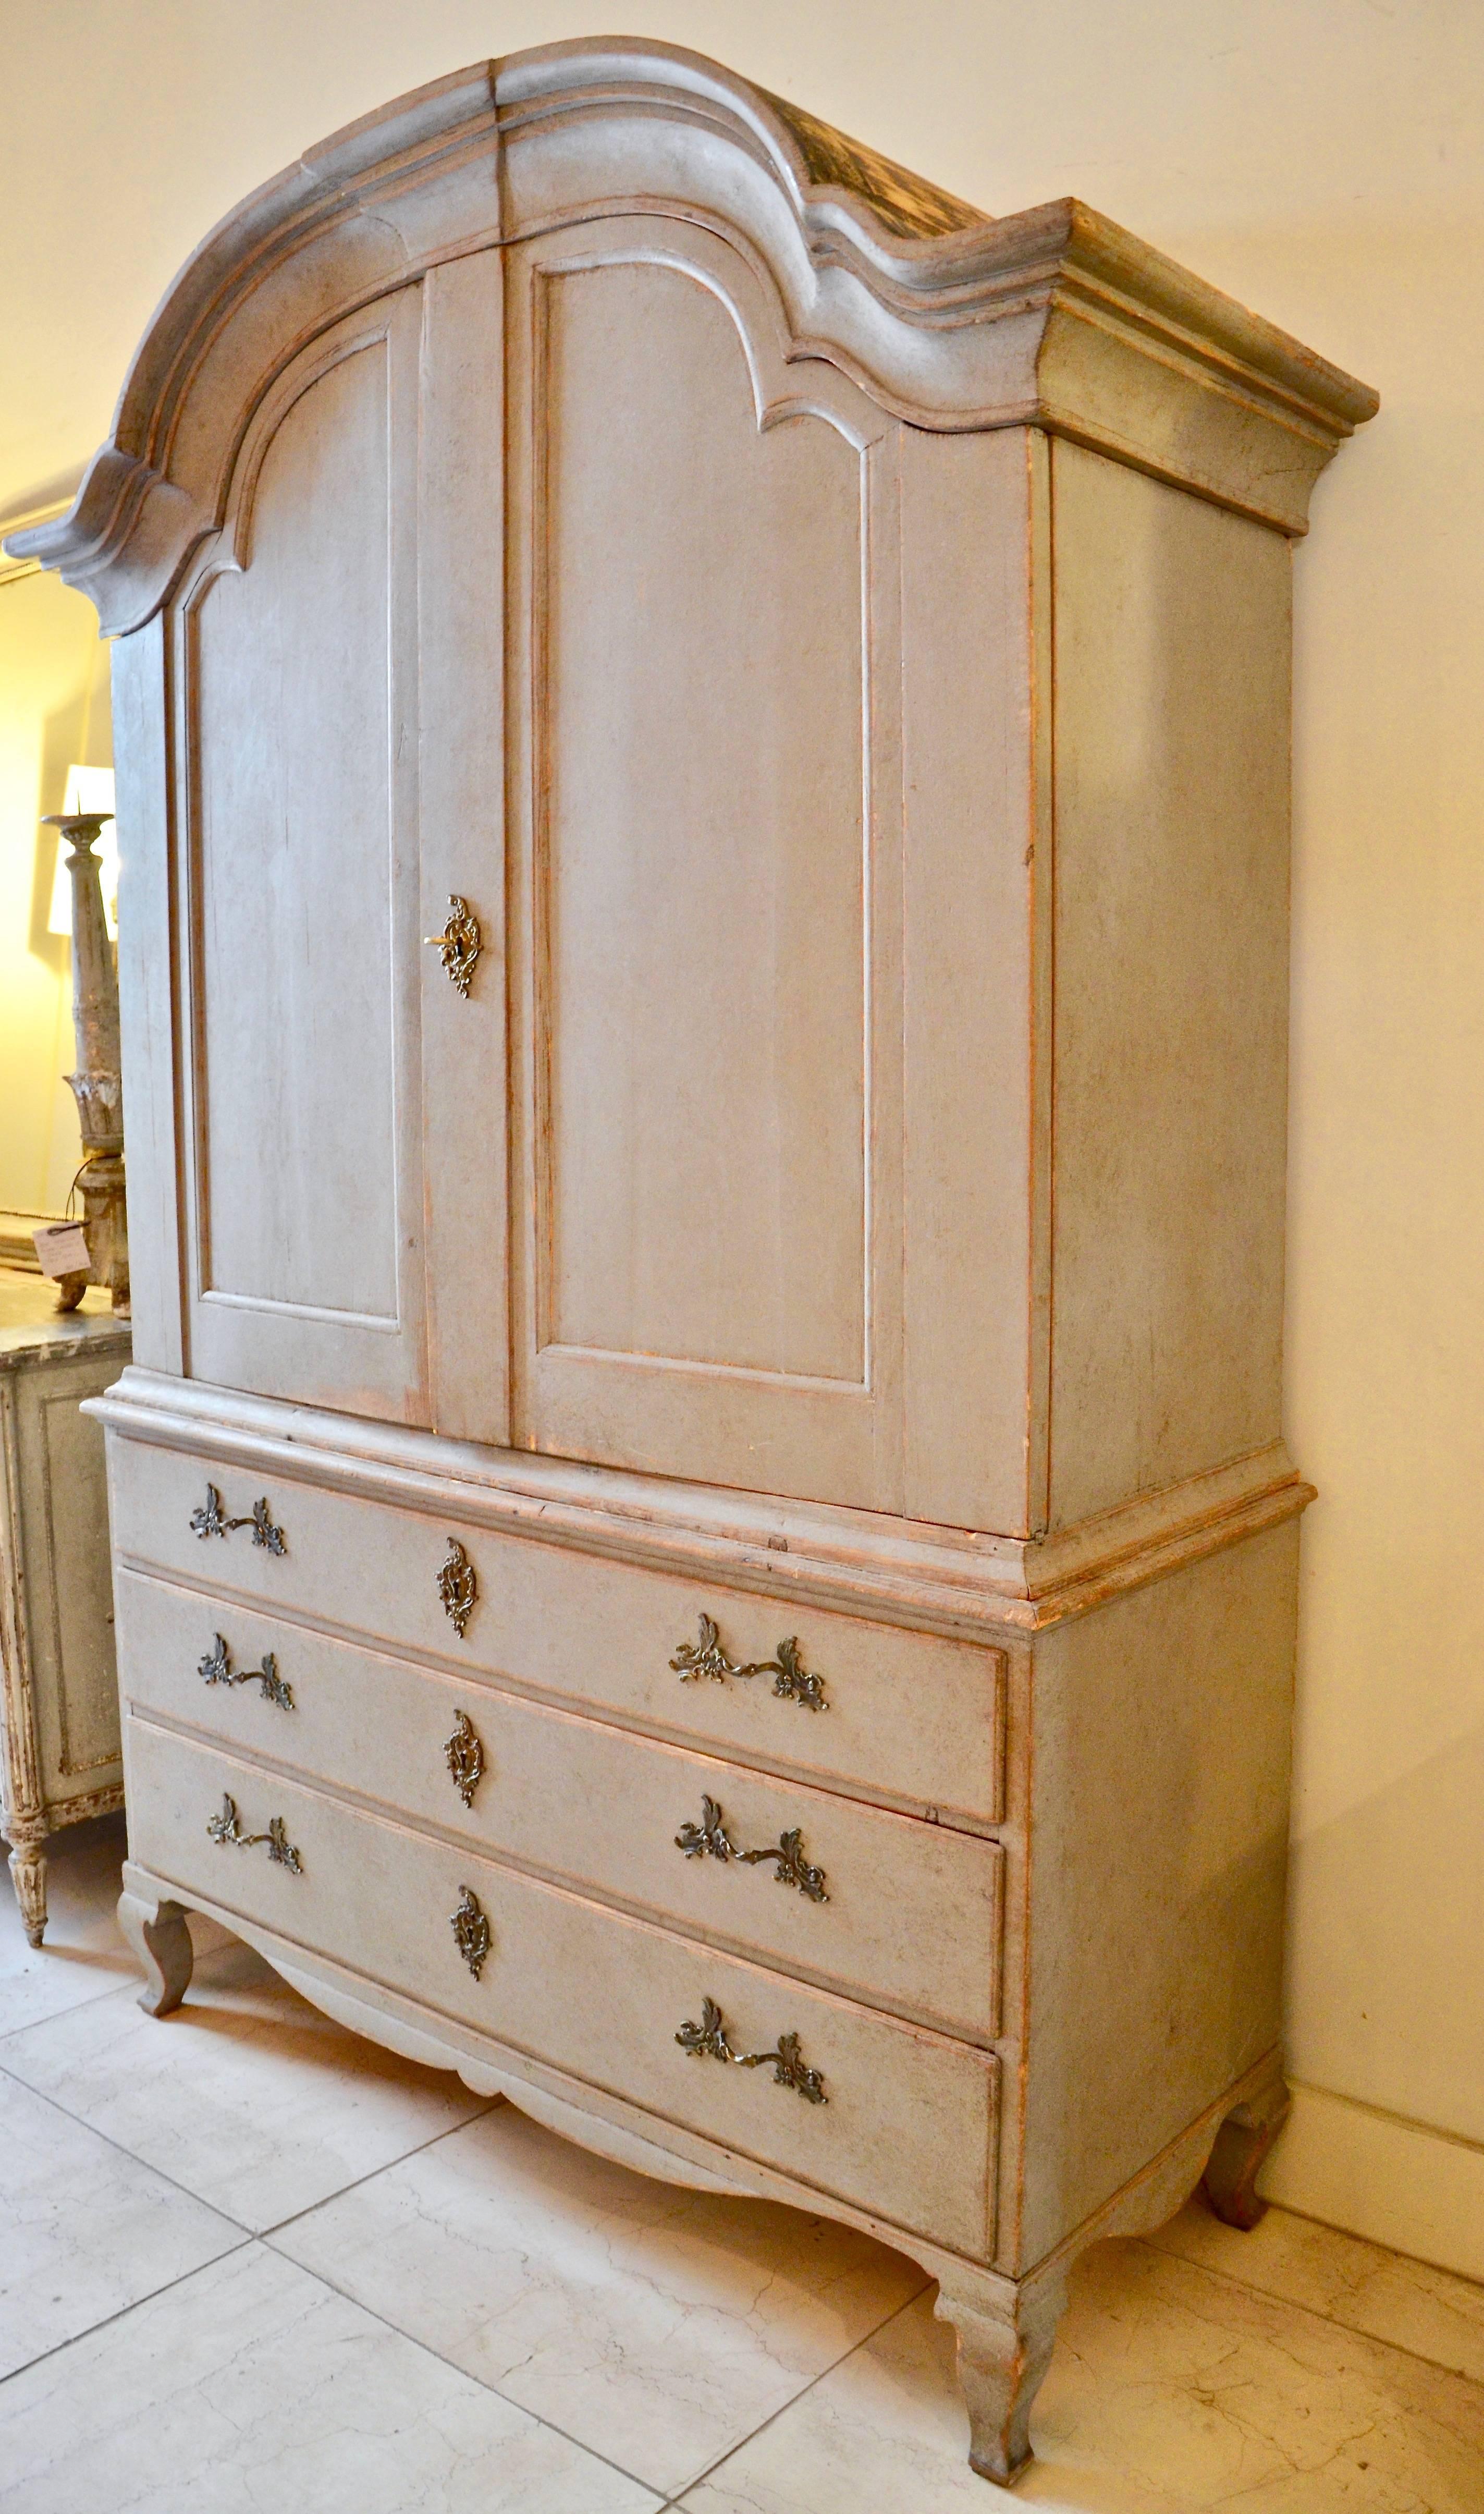 18th century period Swedish rococo cabinet in two parts with bonnet top, raised panel doors, three shelves, four small drawers and a notched spoon shelf, supported by sturdy three drawer base with a scalloped apron and cabriole legs.
More than